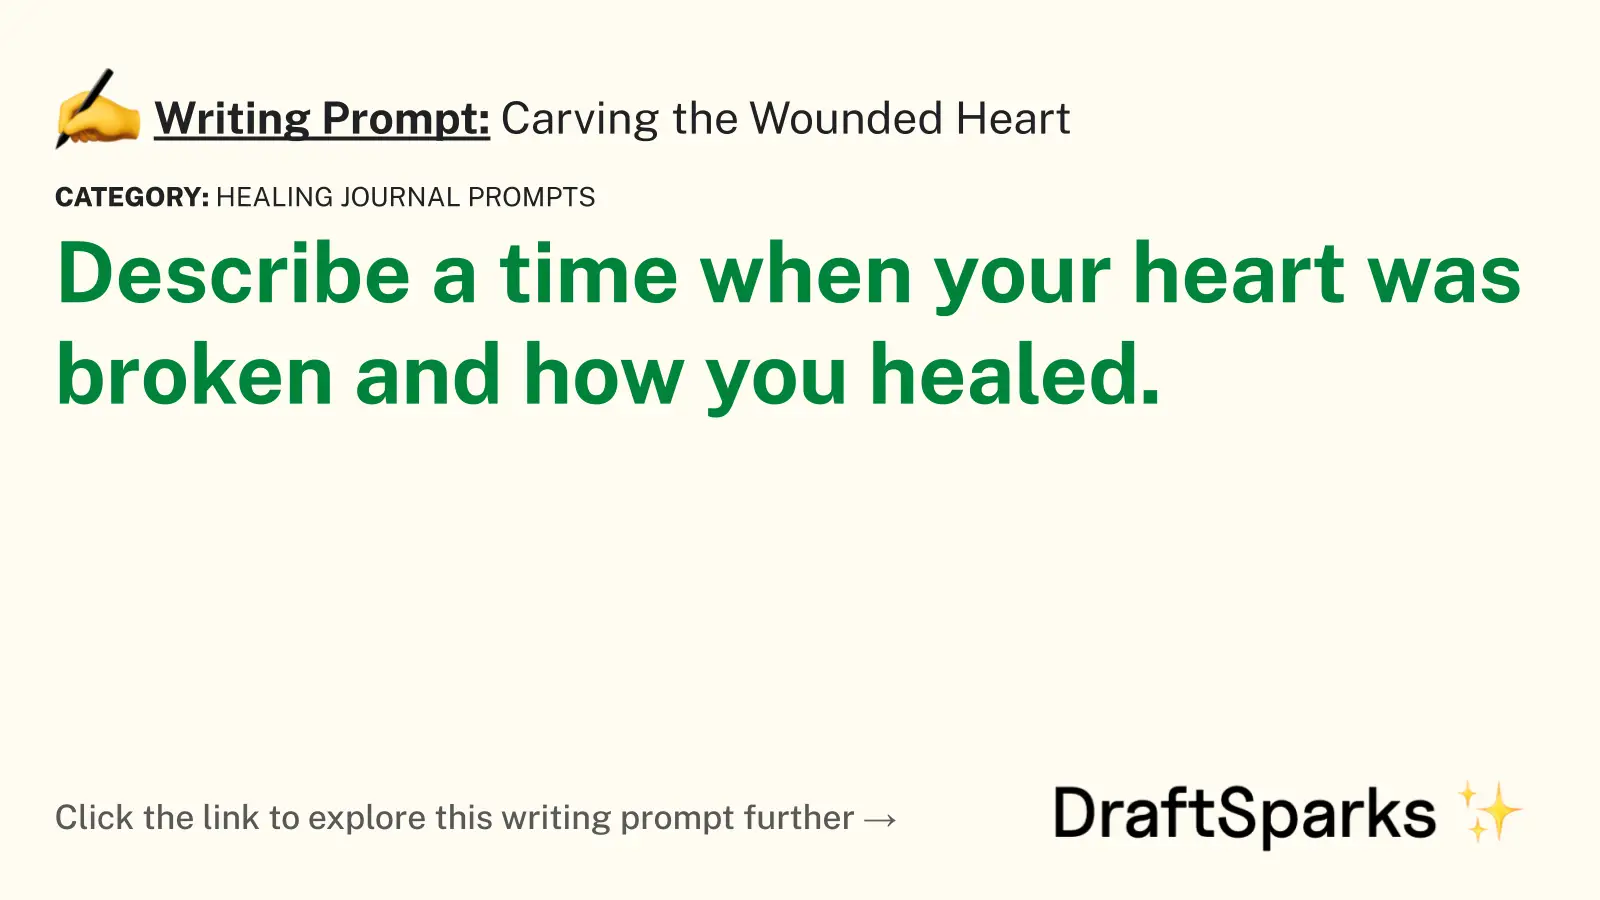 Carving the Wounded Heart